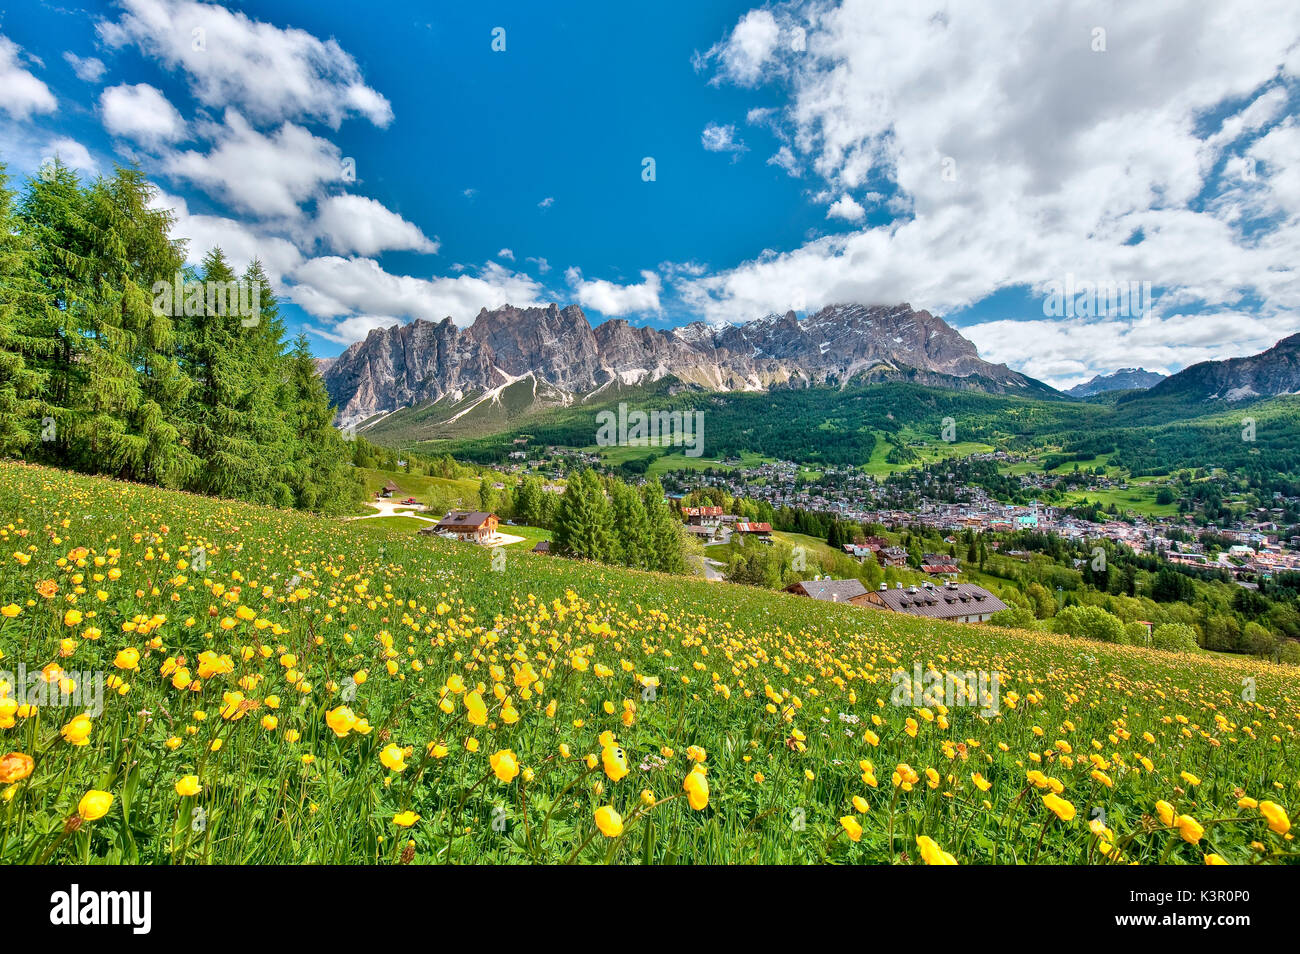 Trollius europaeus or globe-flower blooming in the valley of Cortina d'Ampezzo with the majestic Mount Cristallo in the background, Dolomites, Trentino Alto Adige Italy Europe Stock Photo